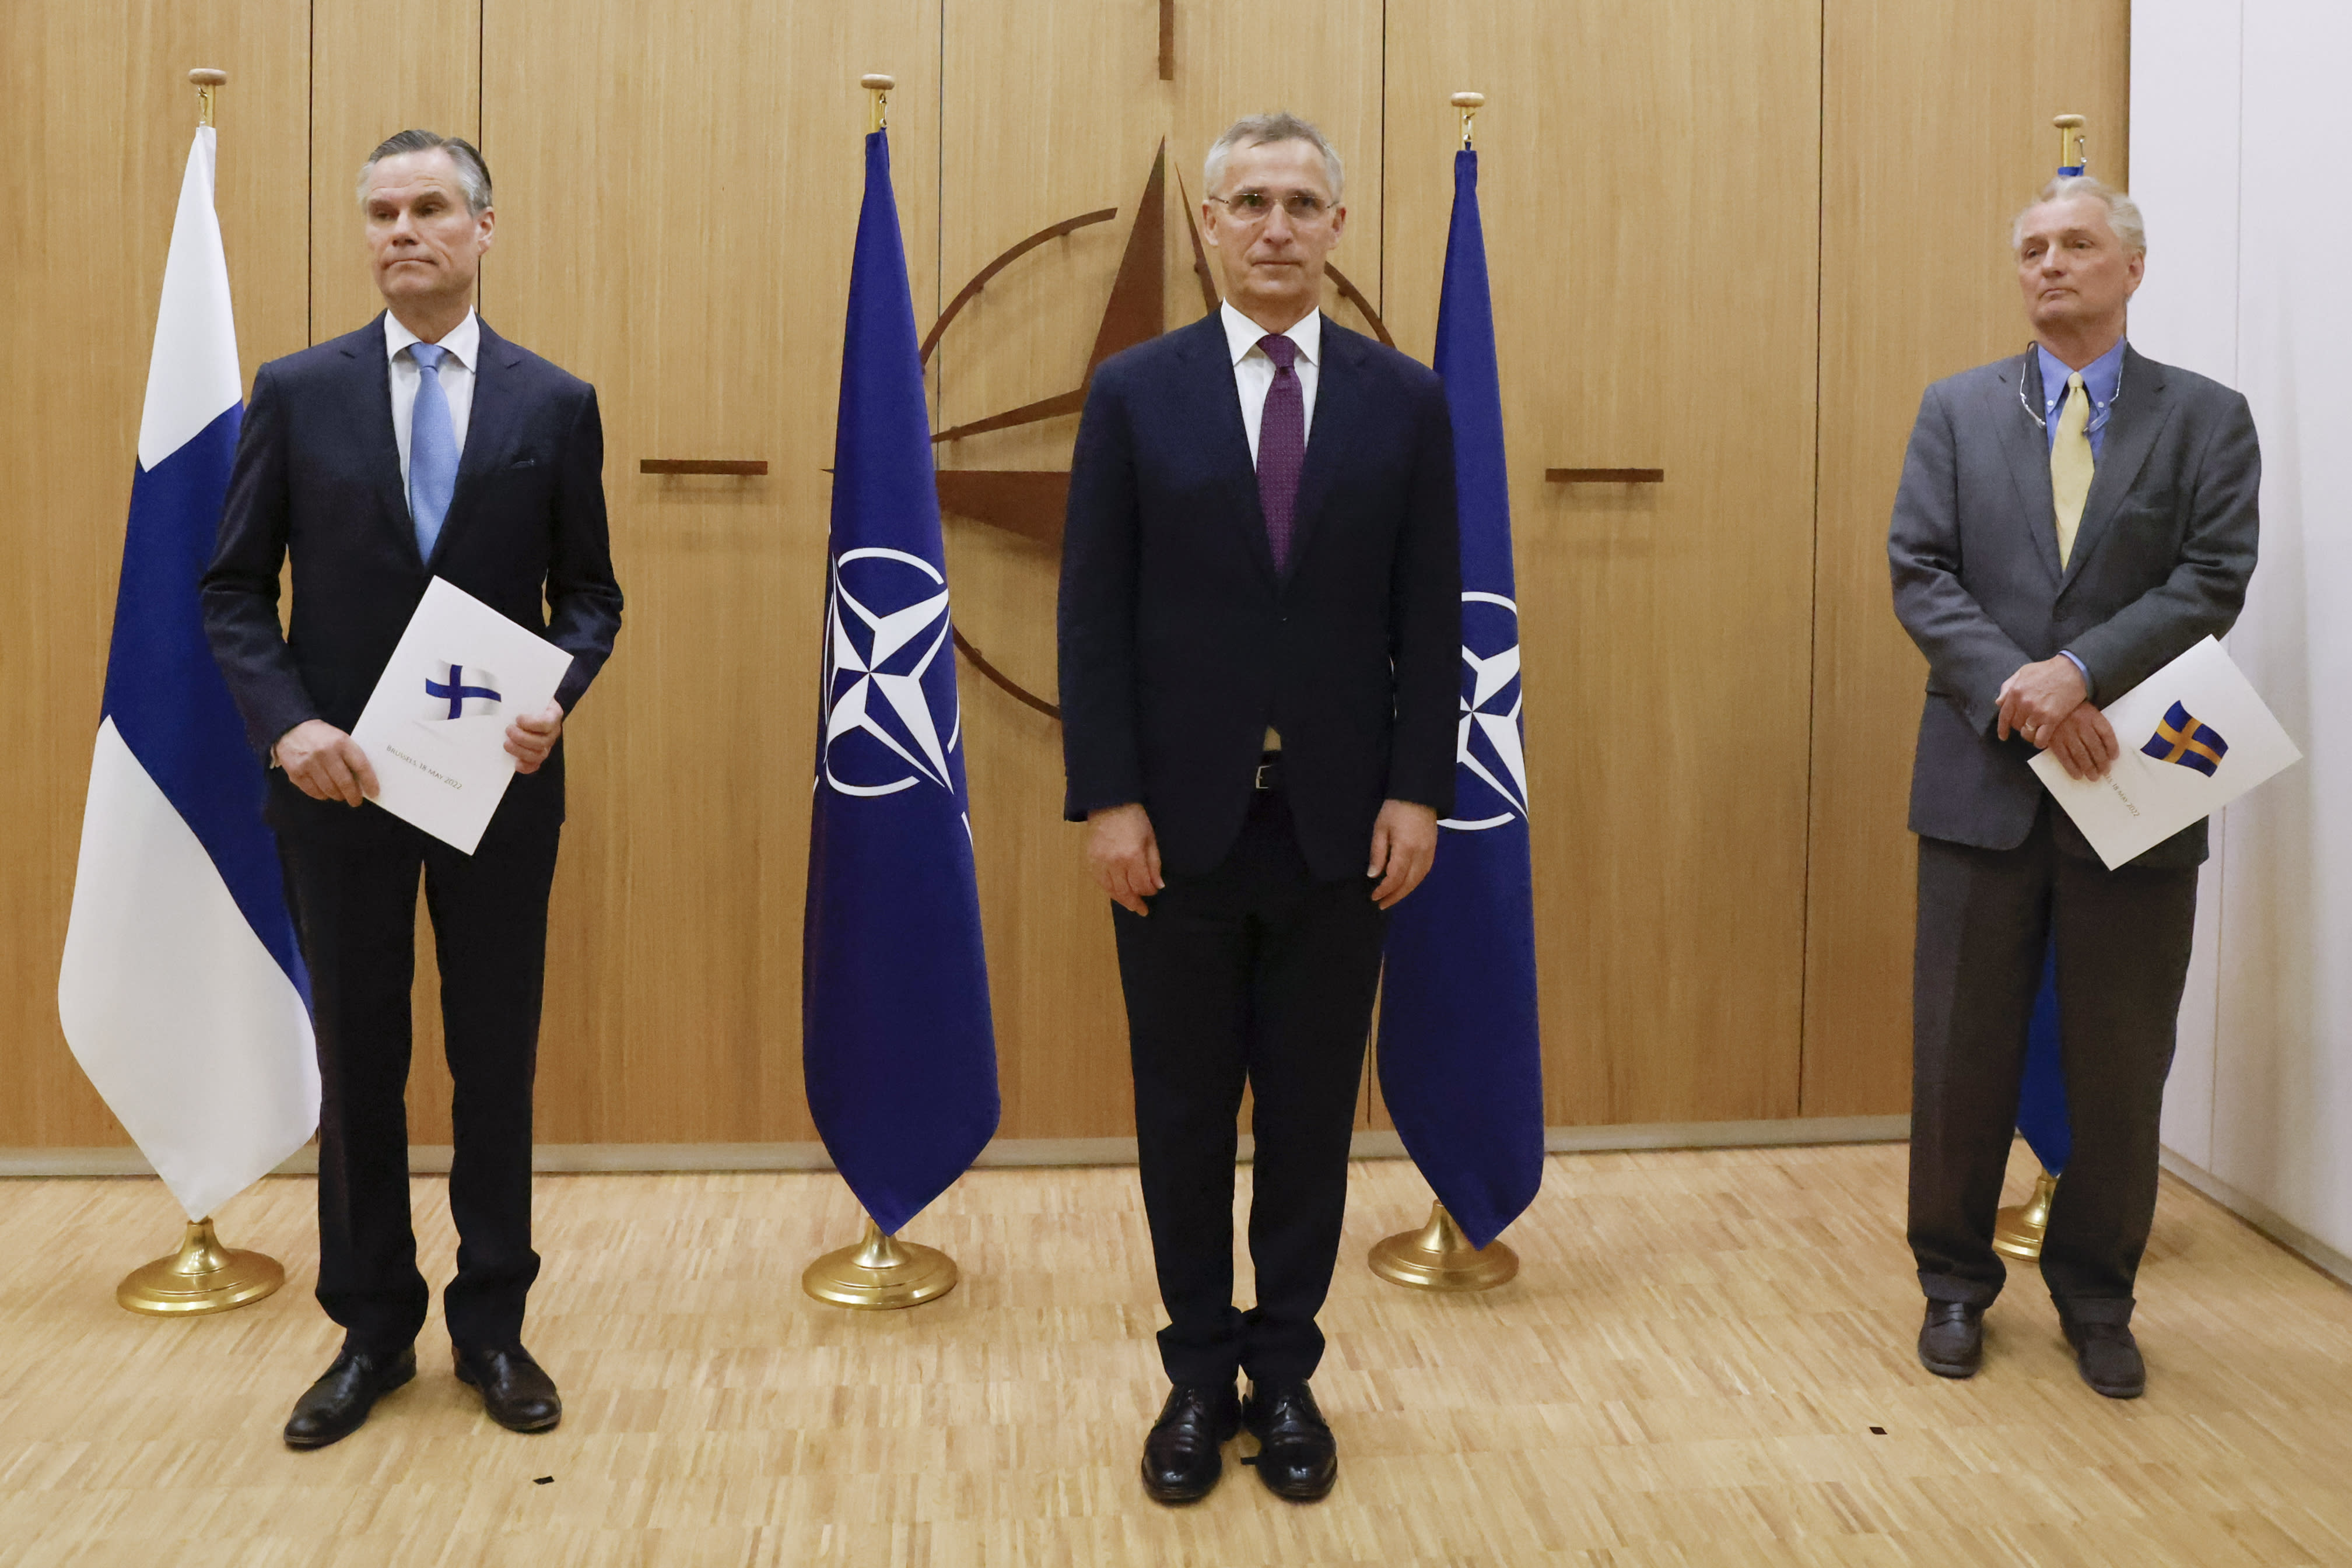 Finland and Sweden officially submit Letters of Application to NATO